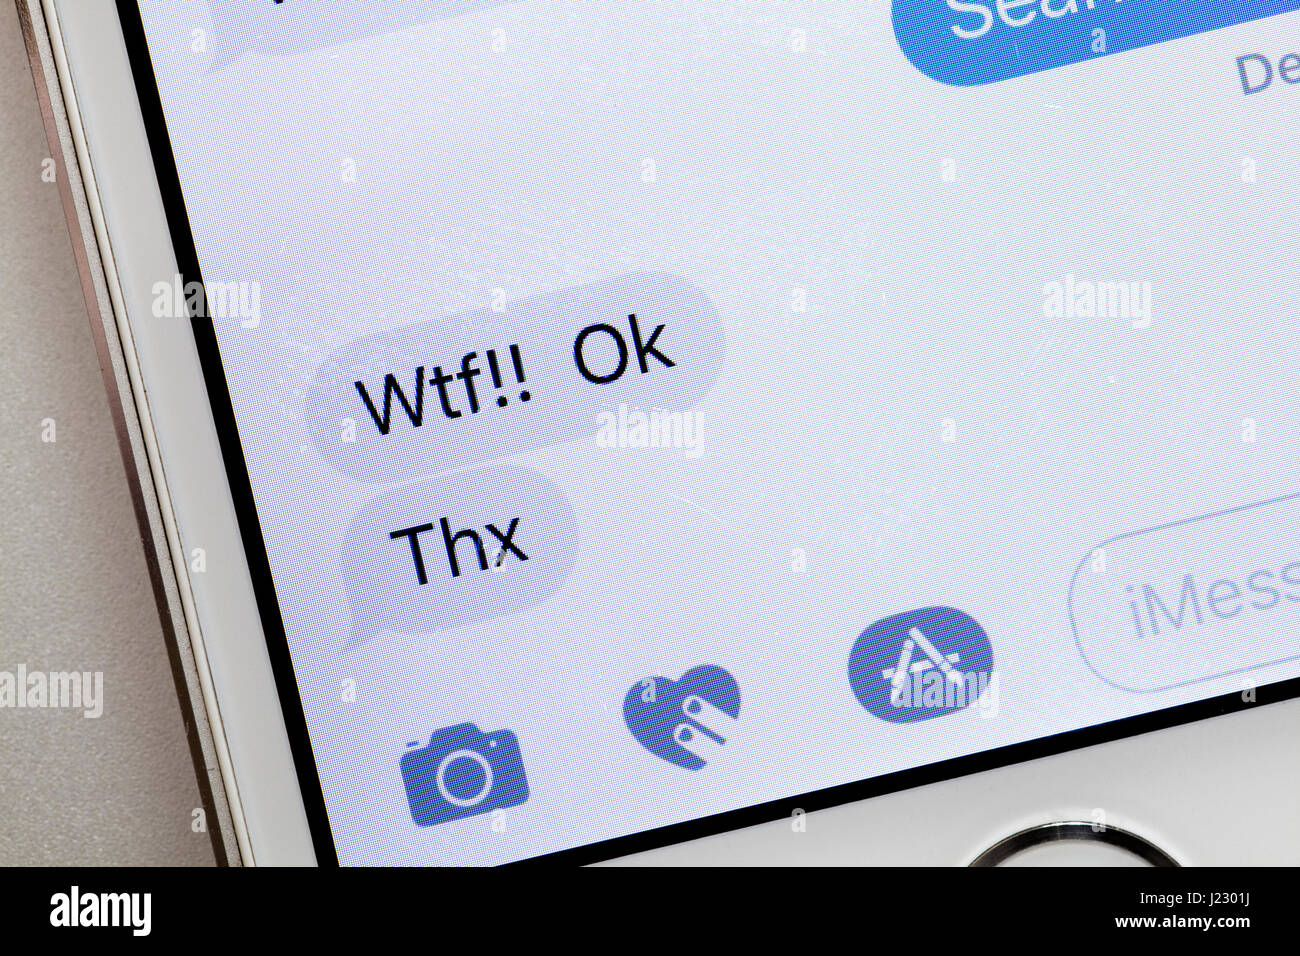 Text message on iPhone screen (WTF text, Thx text) - USA Stock Photo